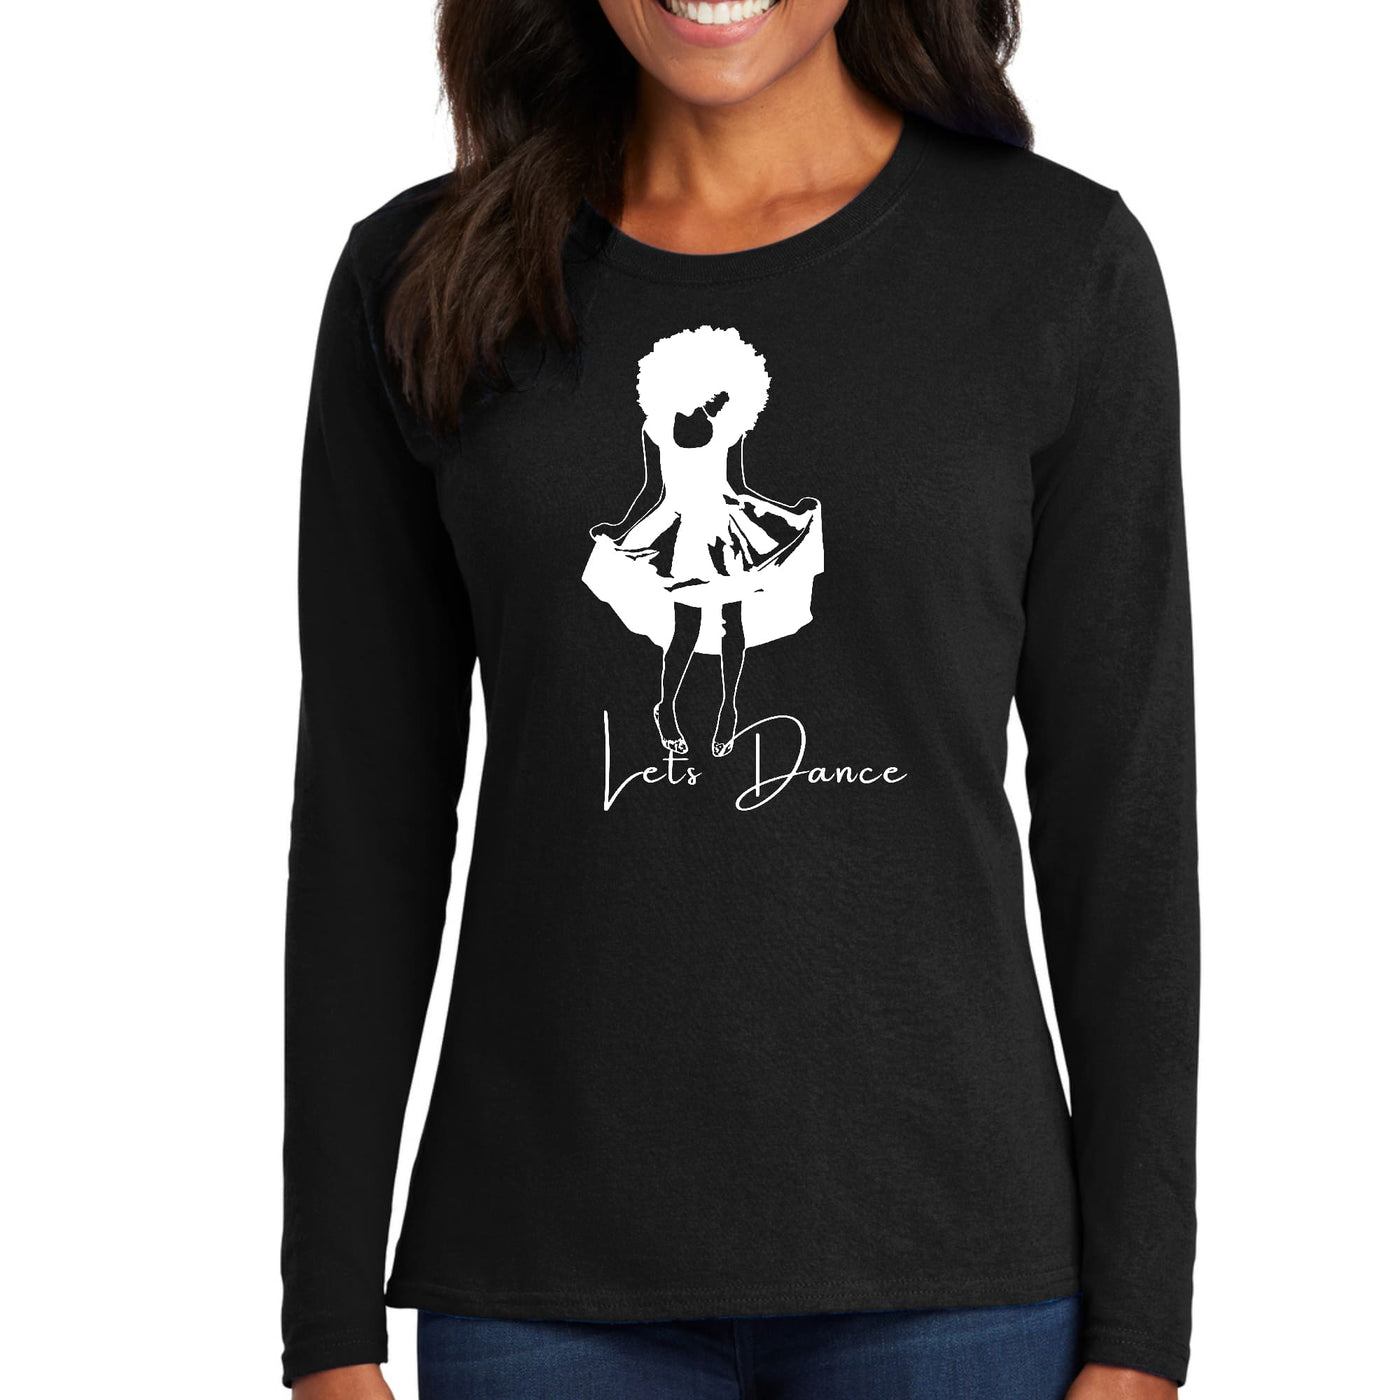 Womens Long Sleeve Graphic T-shirt - Say It Soul Lets Dance White - Womens